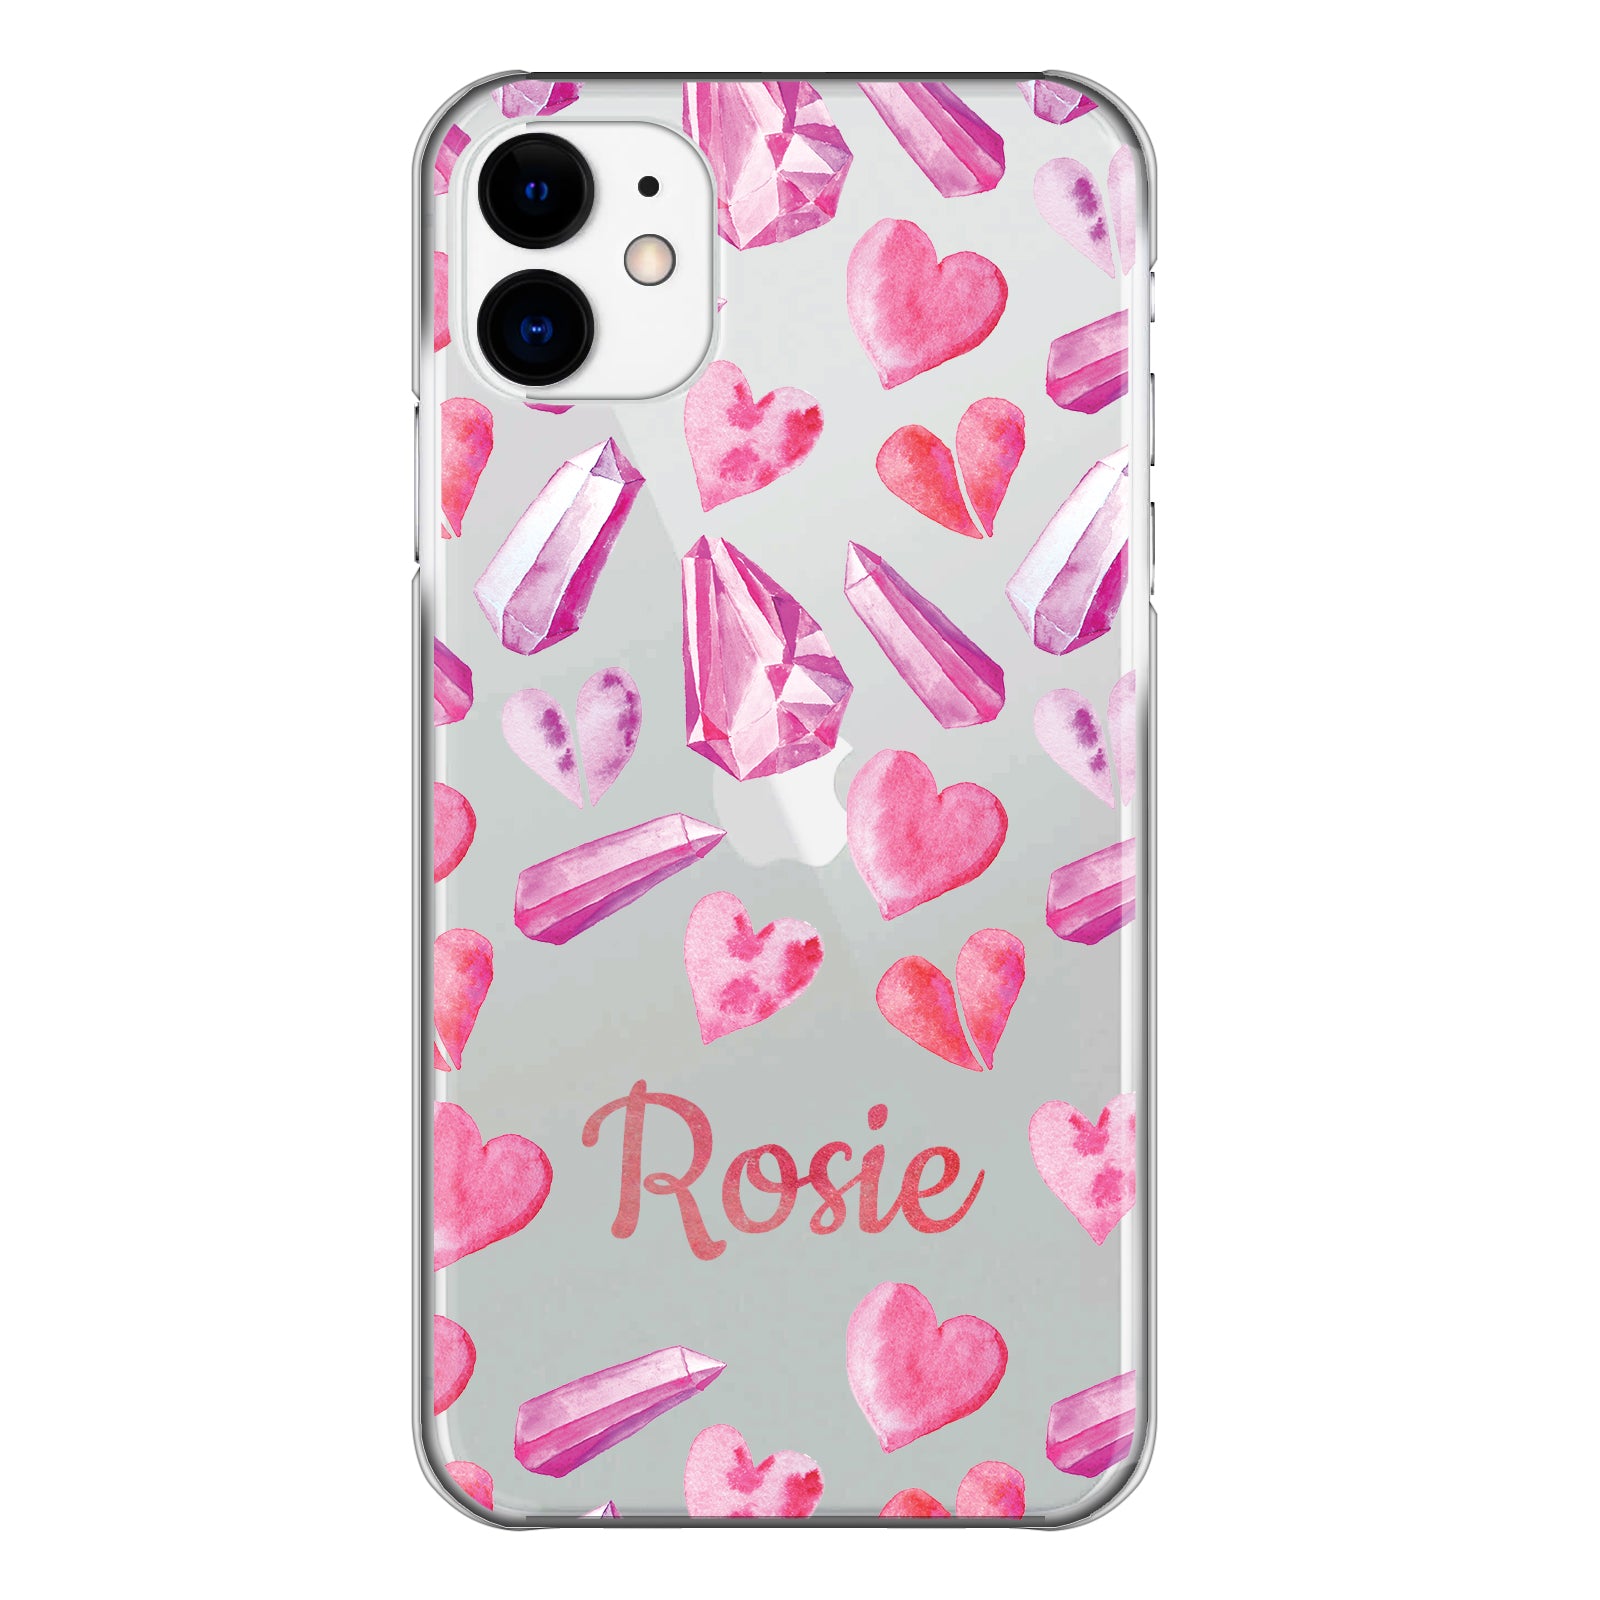 Personalised Apple iPhone Hard Case with Crystal Hearts and Cute Pink Text